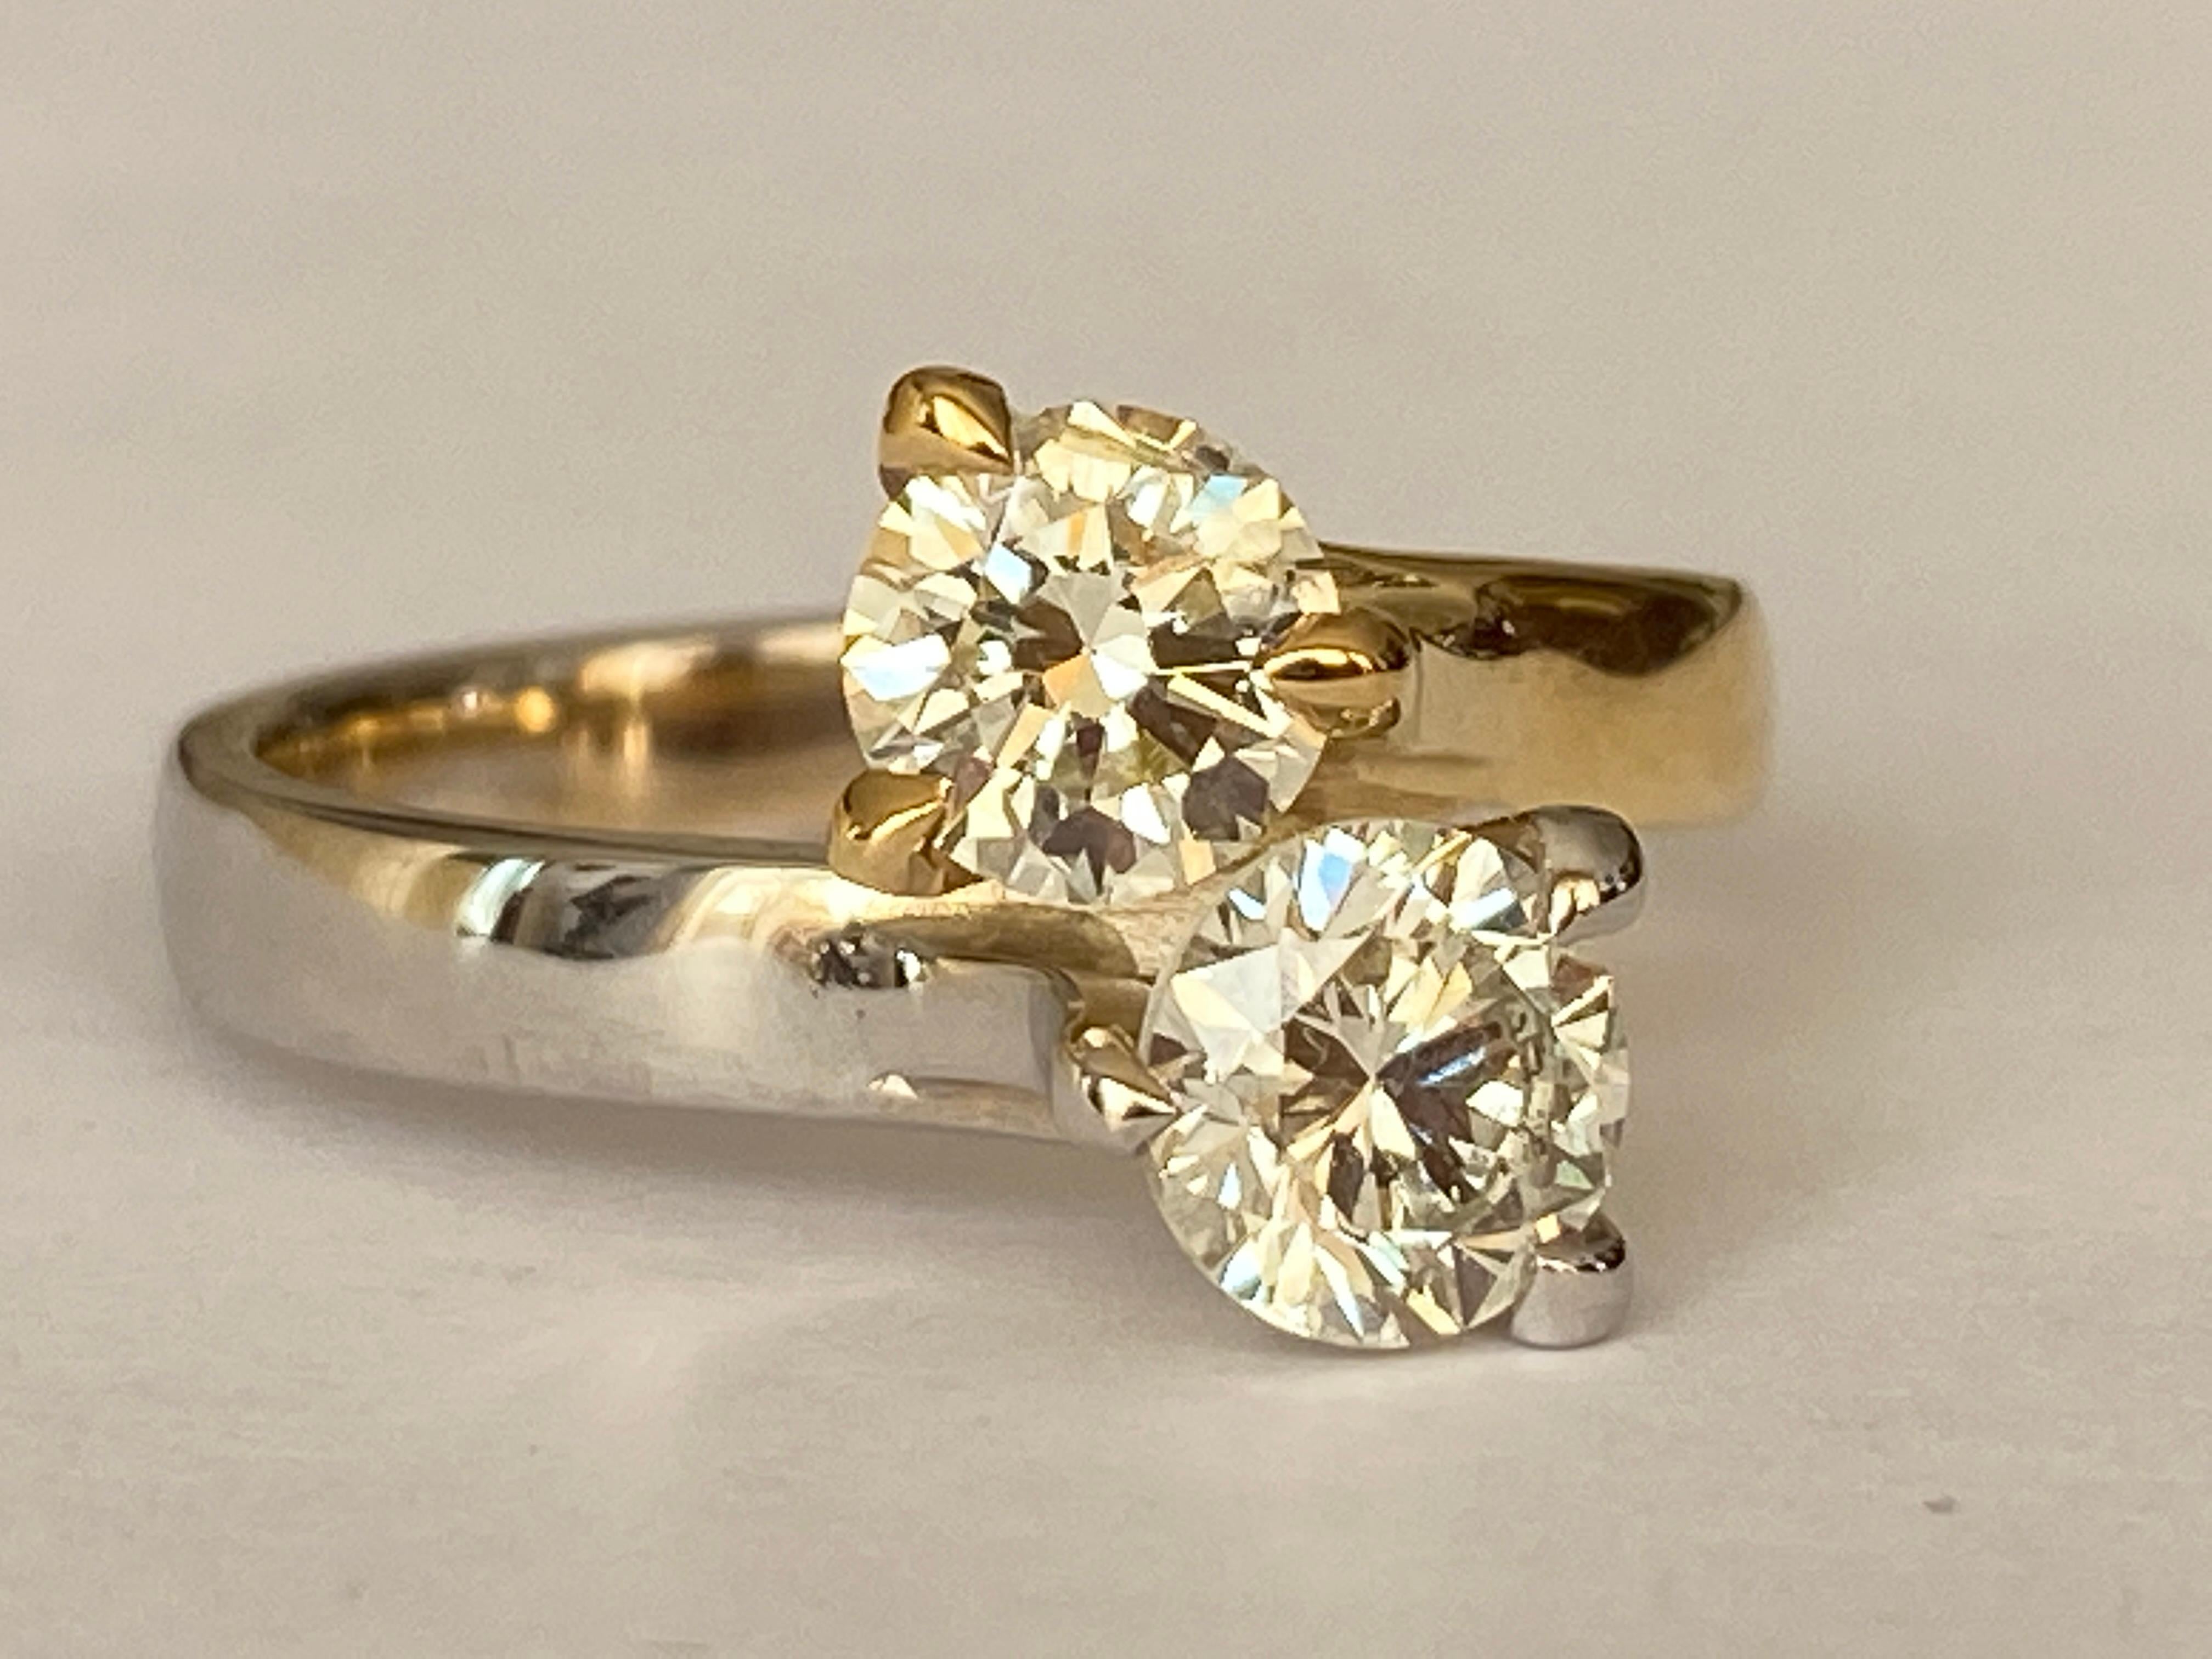 Offered:new handmade 18 karat yellow and white gold 'toi et moi' ring with a total of approx. 1.41 ct brilliant cut diamonds, divided over 2 stones of 0.81 ct L/SI2 and 0.61 ct M/P1. ALGT certificate number 60675224 is included.
Grade: 750 (marked)